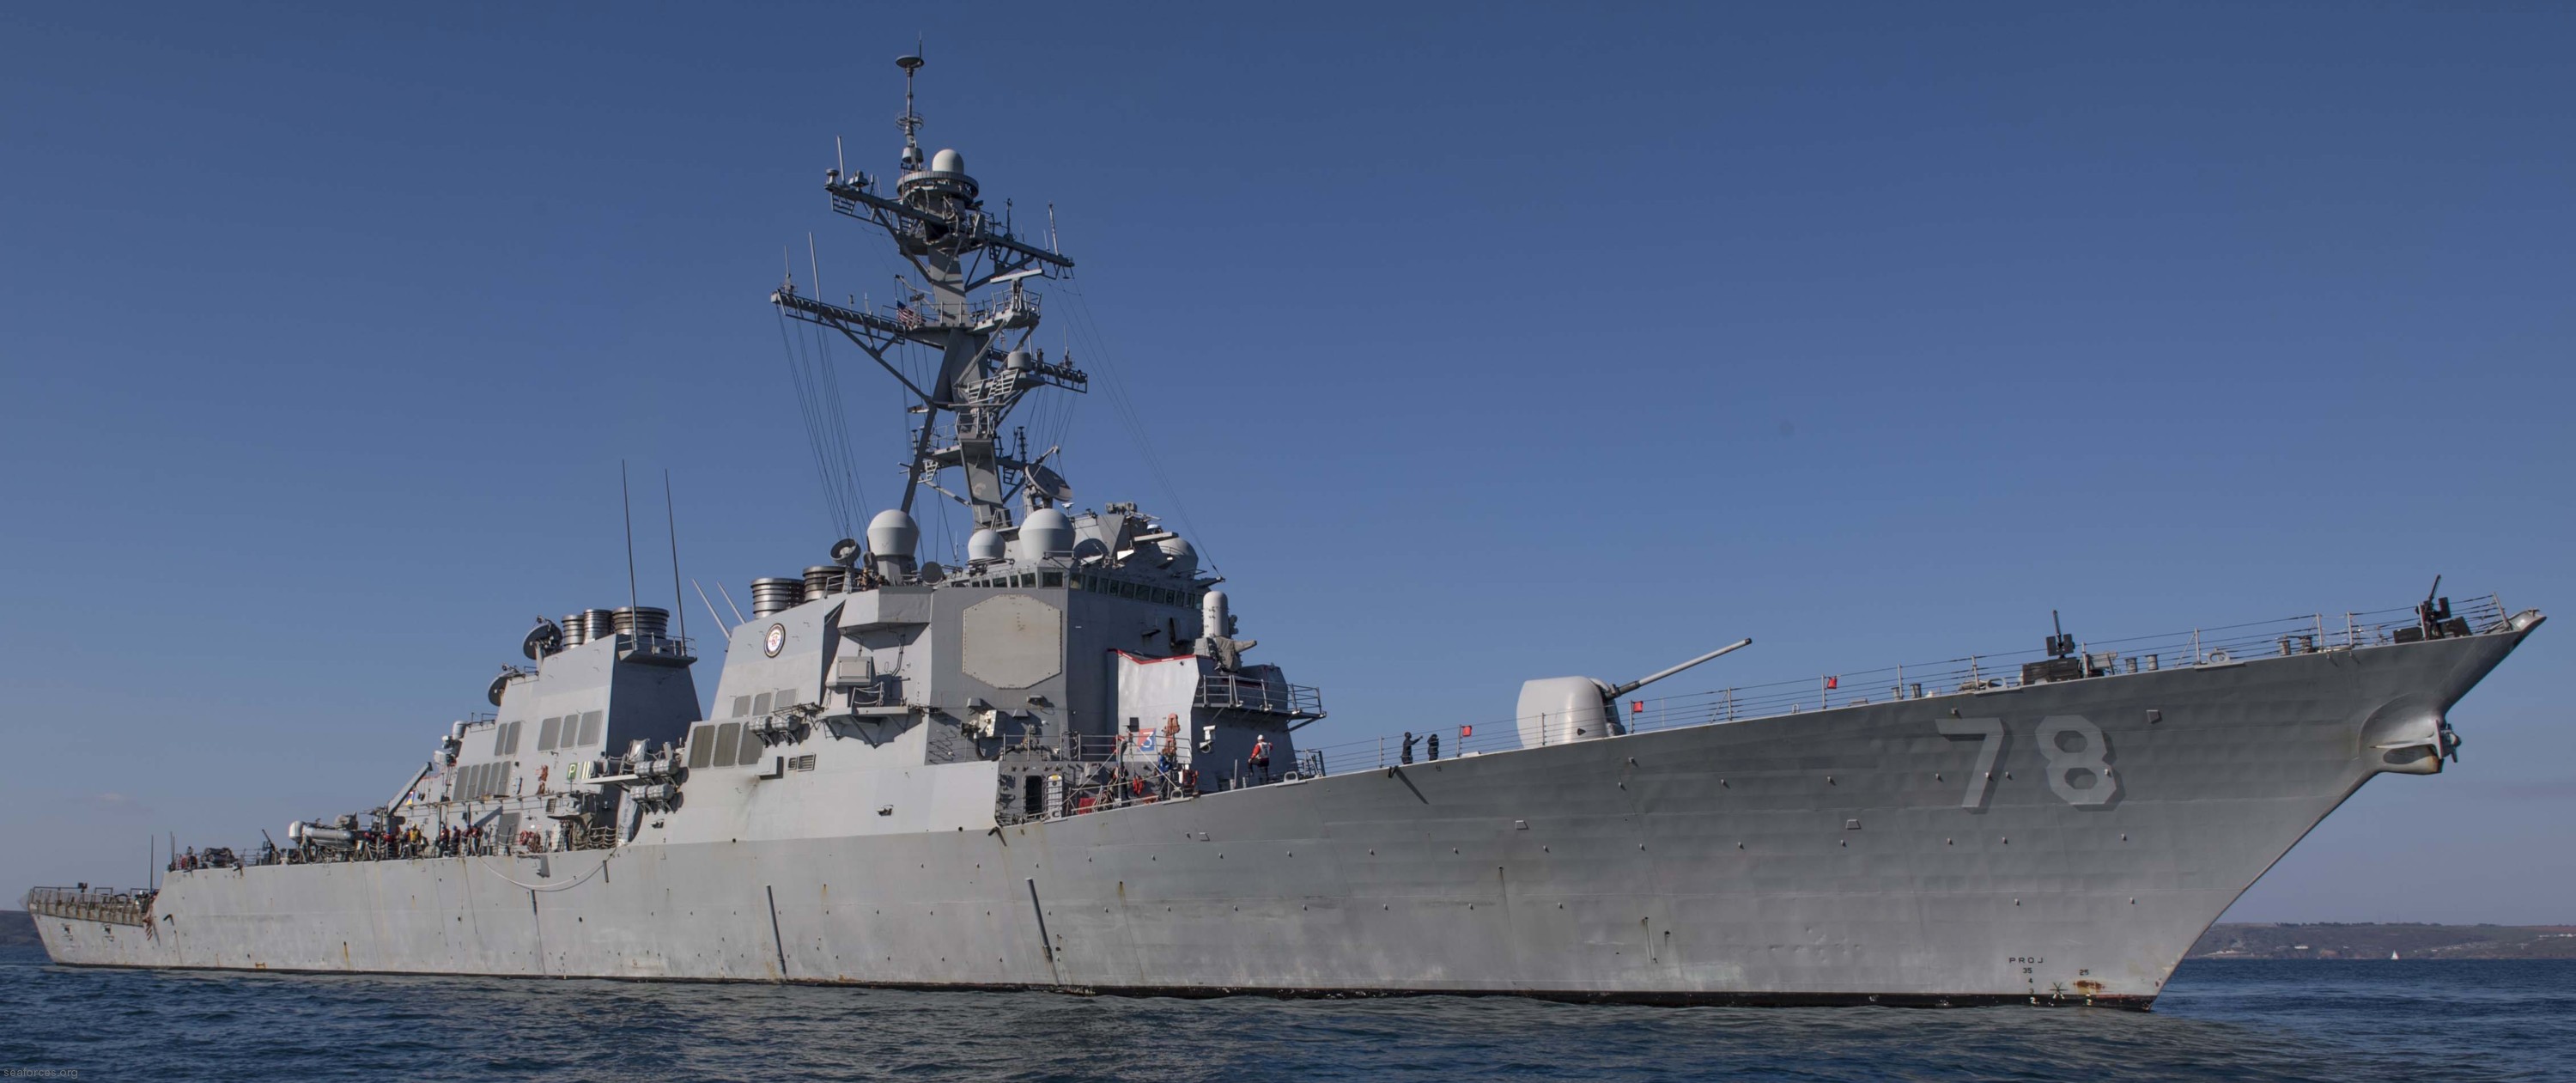 ddg-78 uss porter guided missile destroyer arleigh burke class aegis 26 english channel